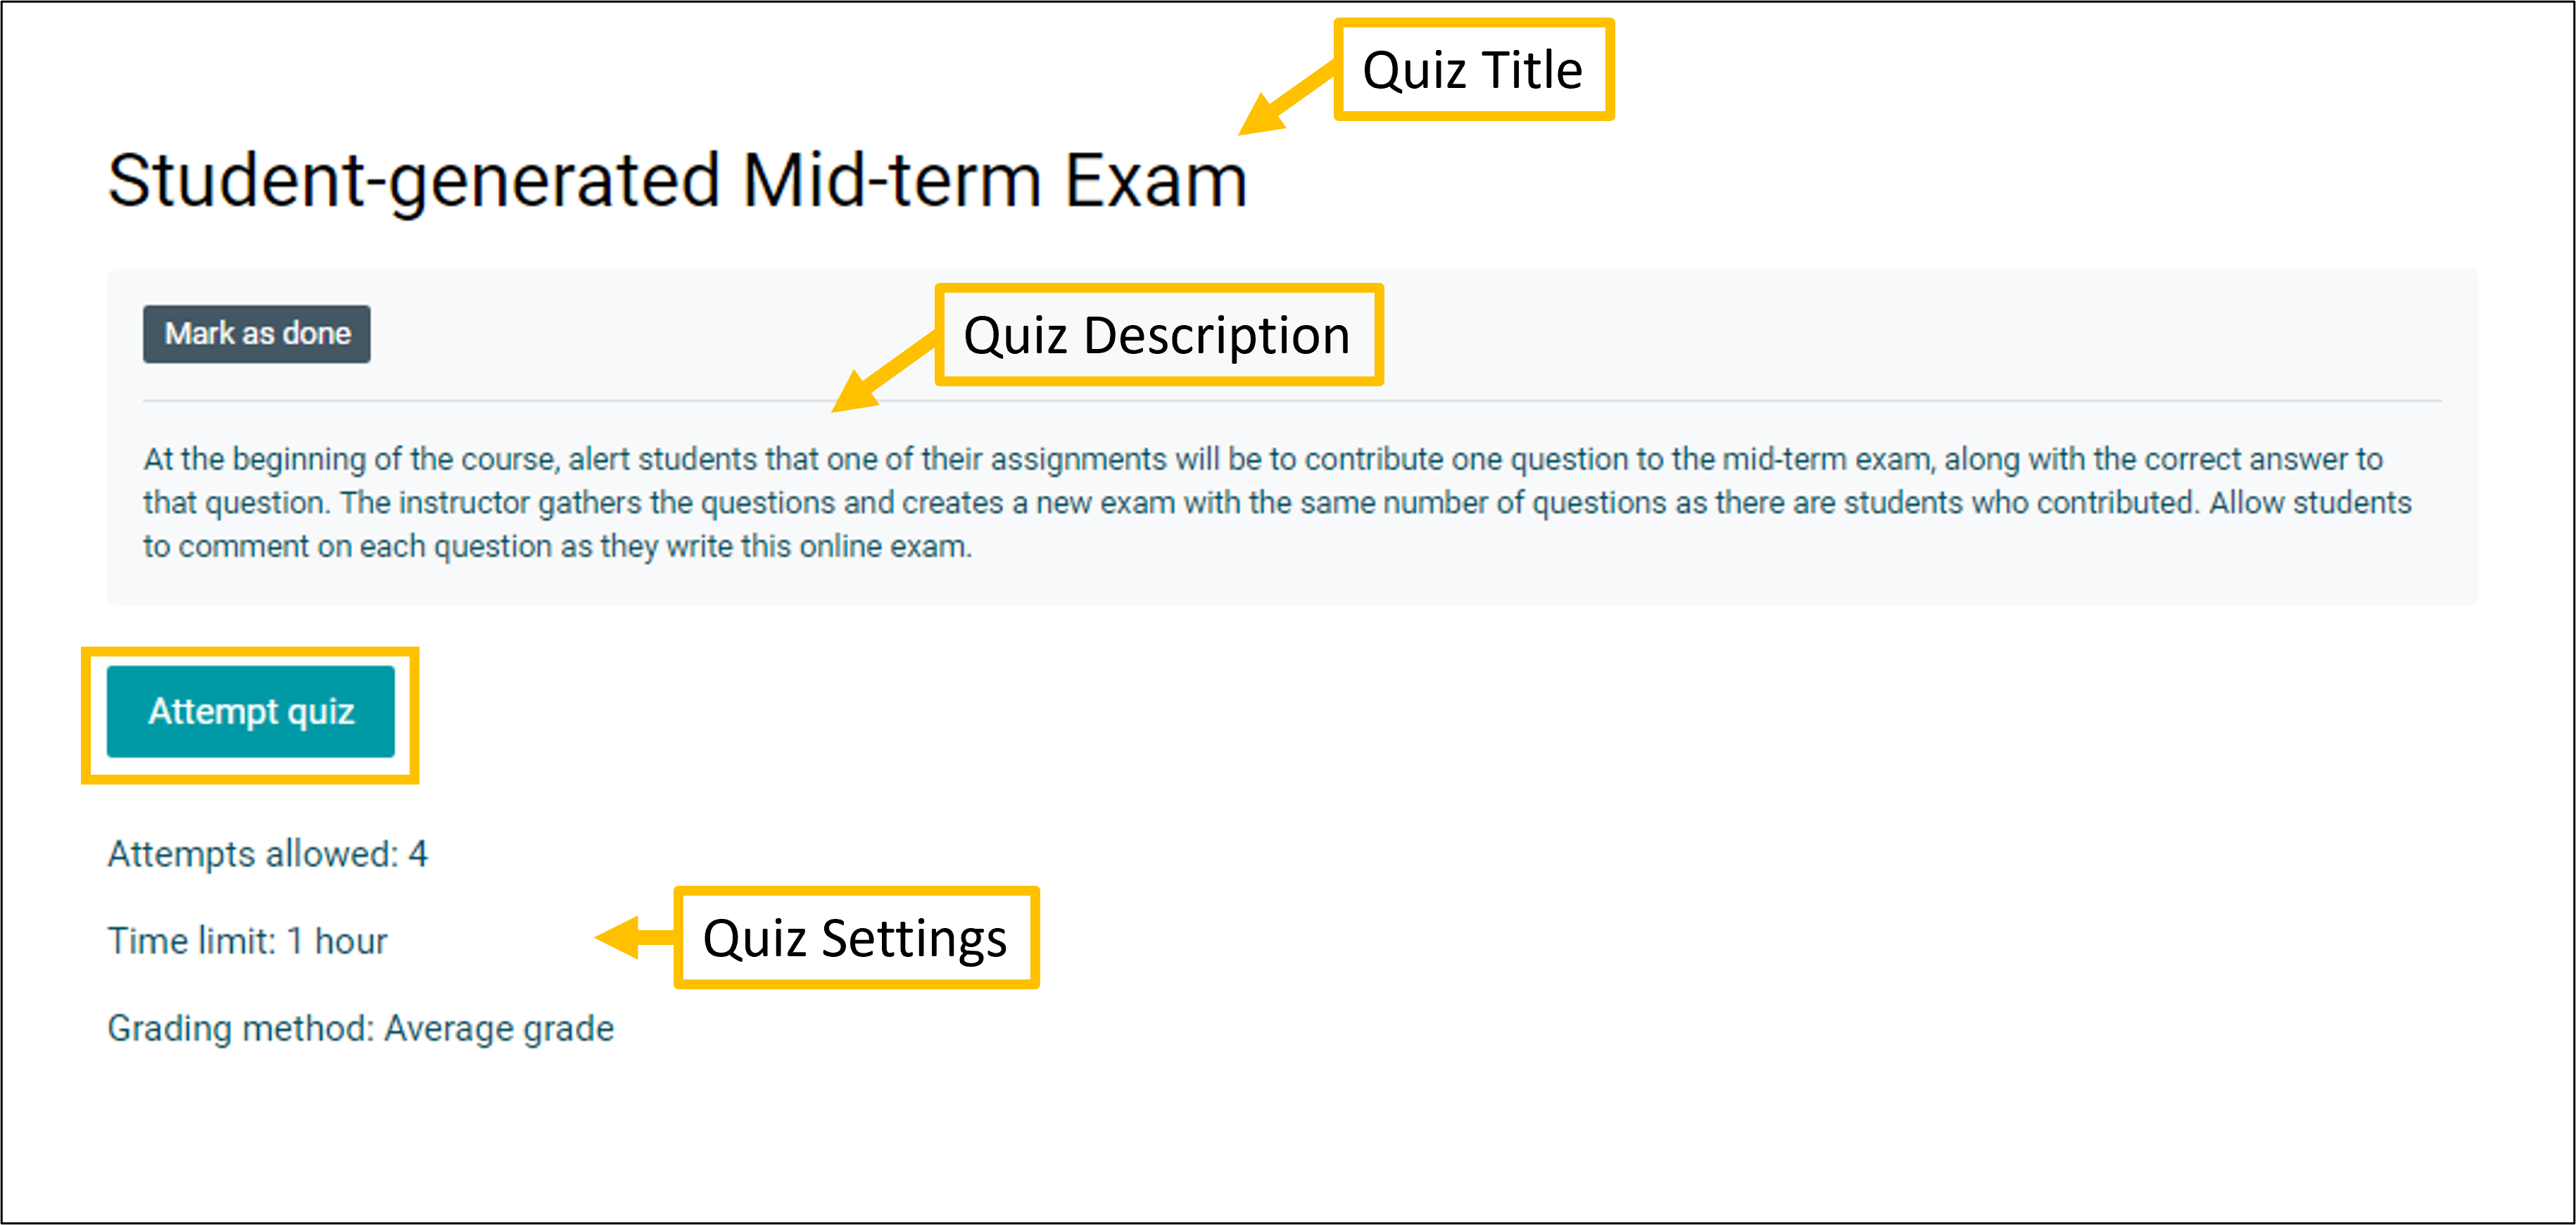 Displays quiz summary page with the title, description, and settings highlighted as well as the "Attempt Quiz" button